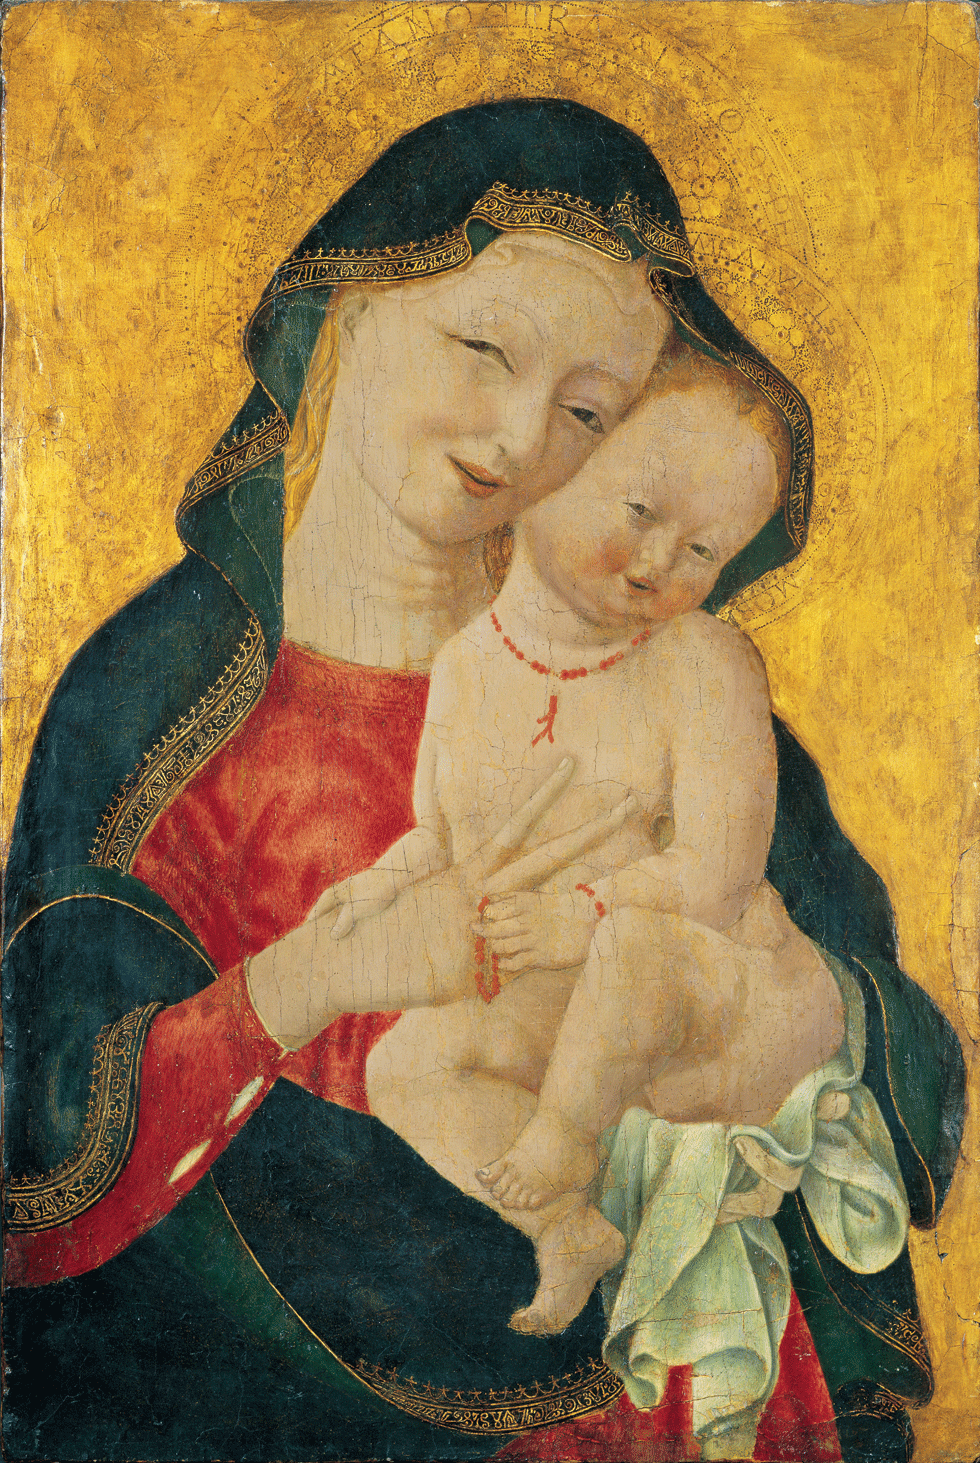 Master of the Winking Eyes (act. Ferrara, ca. 1450–1470), Madonna and Child (Madonna col Bambino), ca. 1450; Tempera and gold on wood panel, 23 1/8 × 15 1/4 in.; Grimaldi Fava Collection